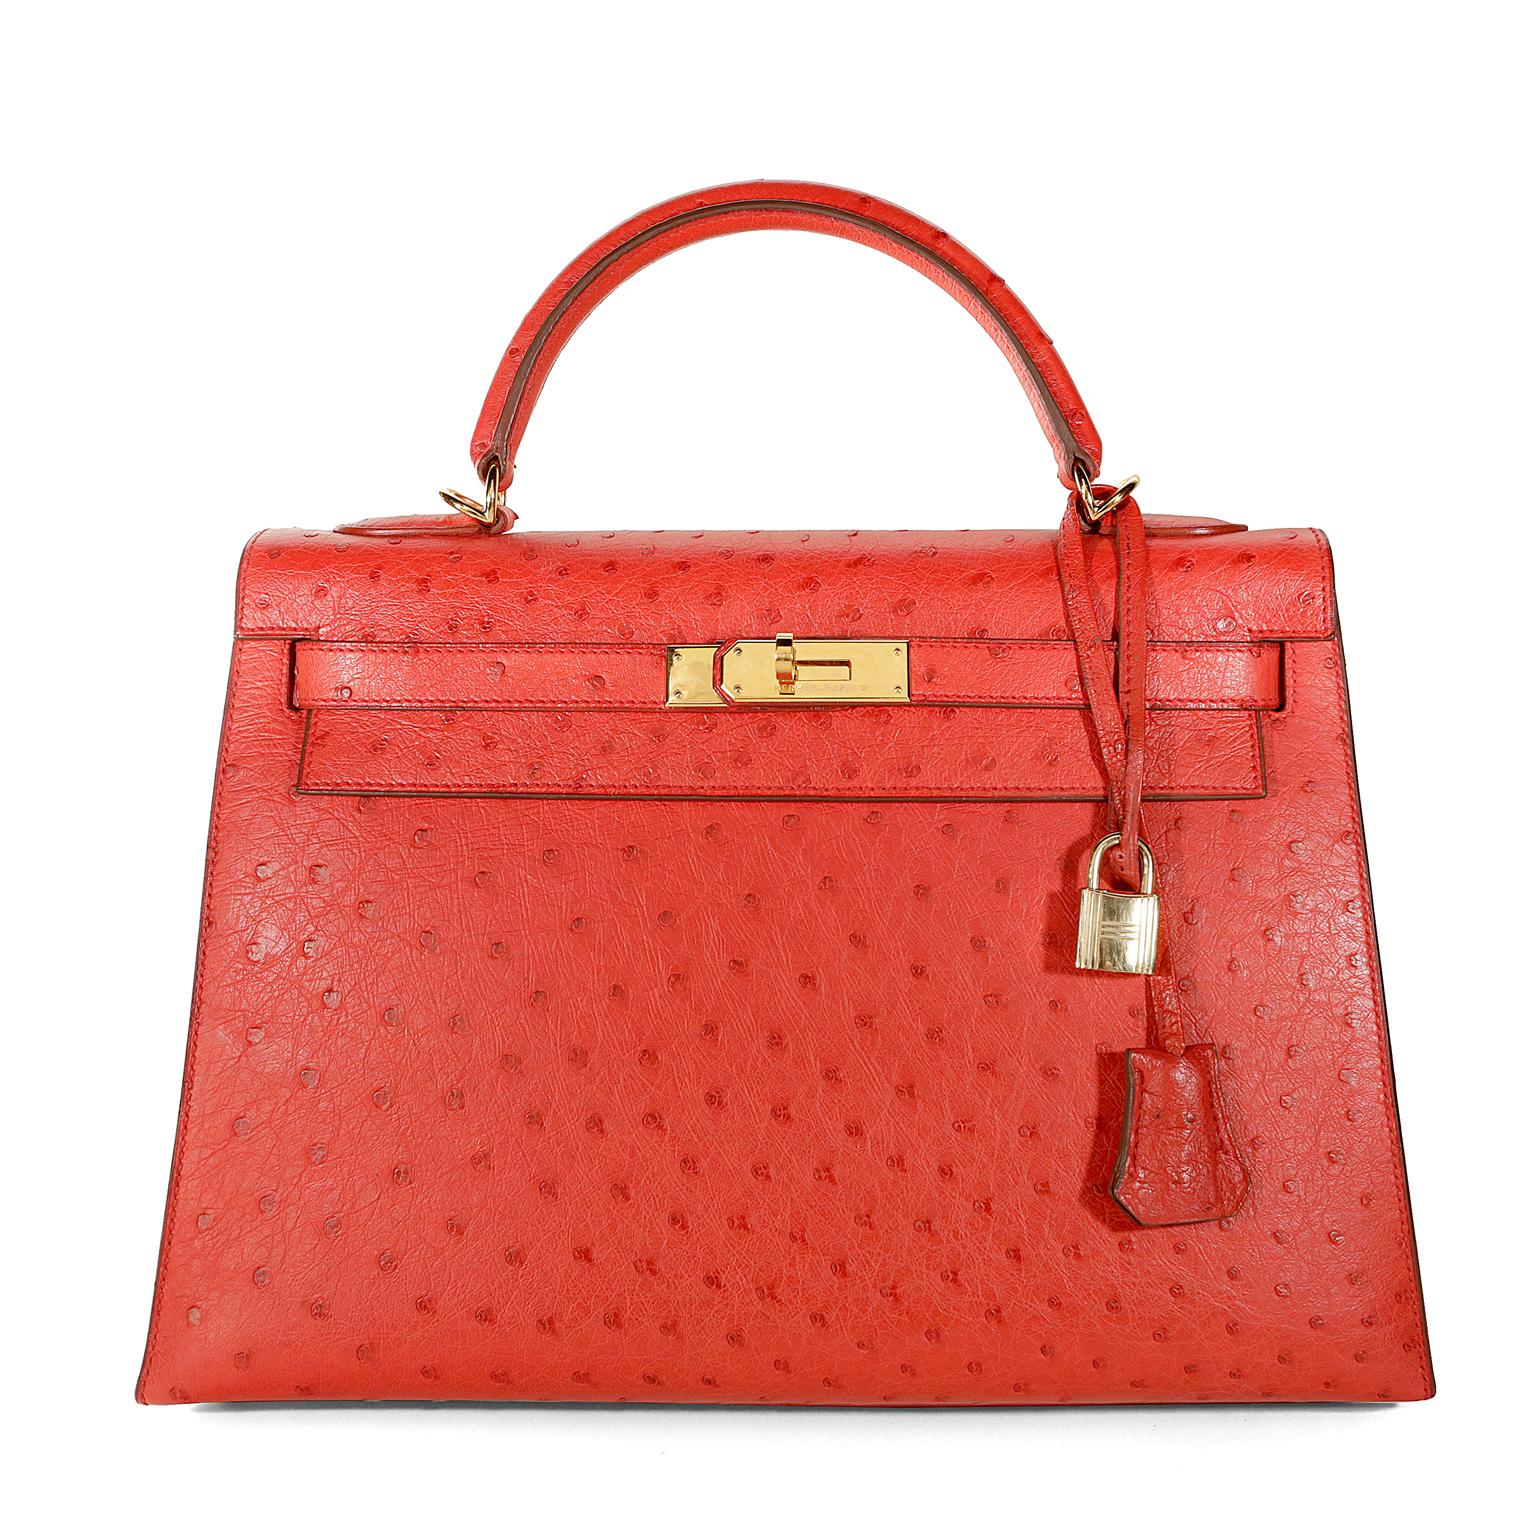 Hermès Rouge VIF 32 cm Kelly-  Excellent Plus Condition
Hermès bags are considered the ultimate luxury item worldwide.  Each piece is handcrafted with waitlists that can exceed a year or more.  The streamlined and demure Kelly style is always in